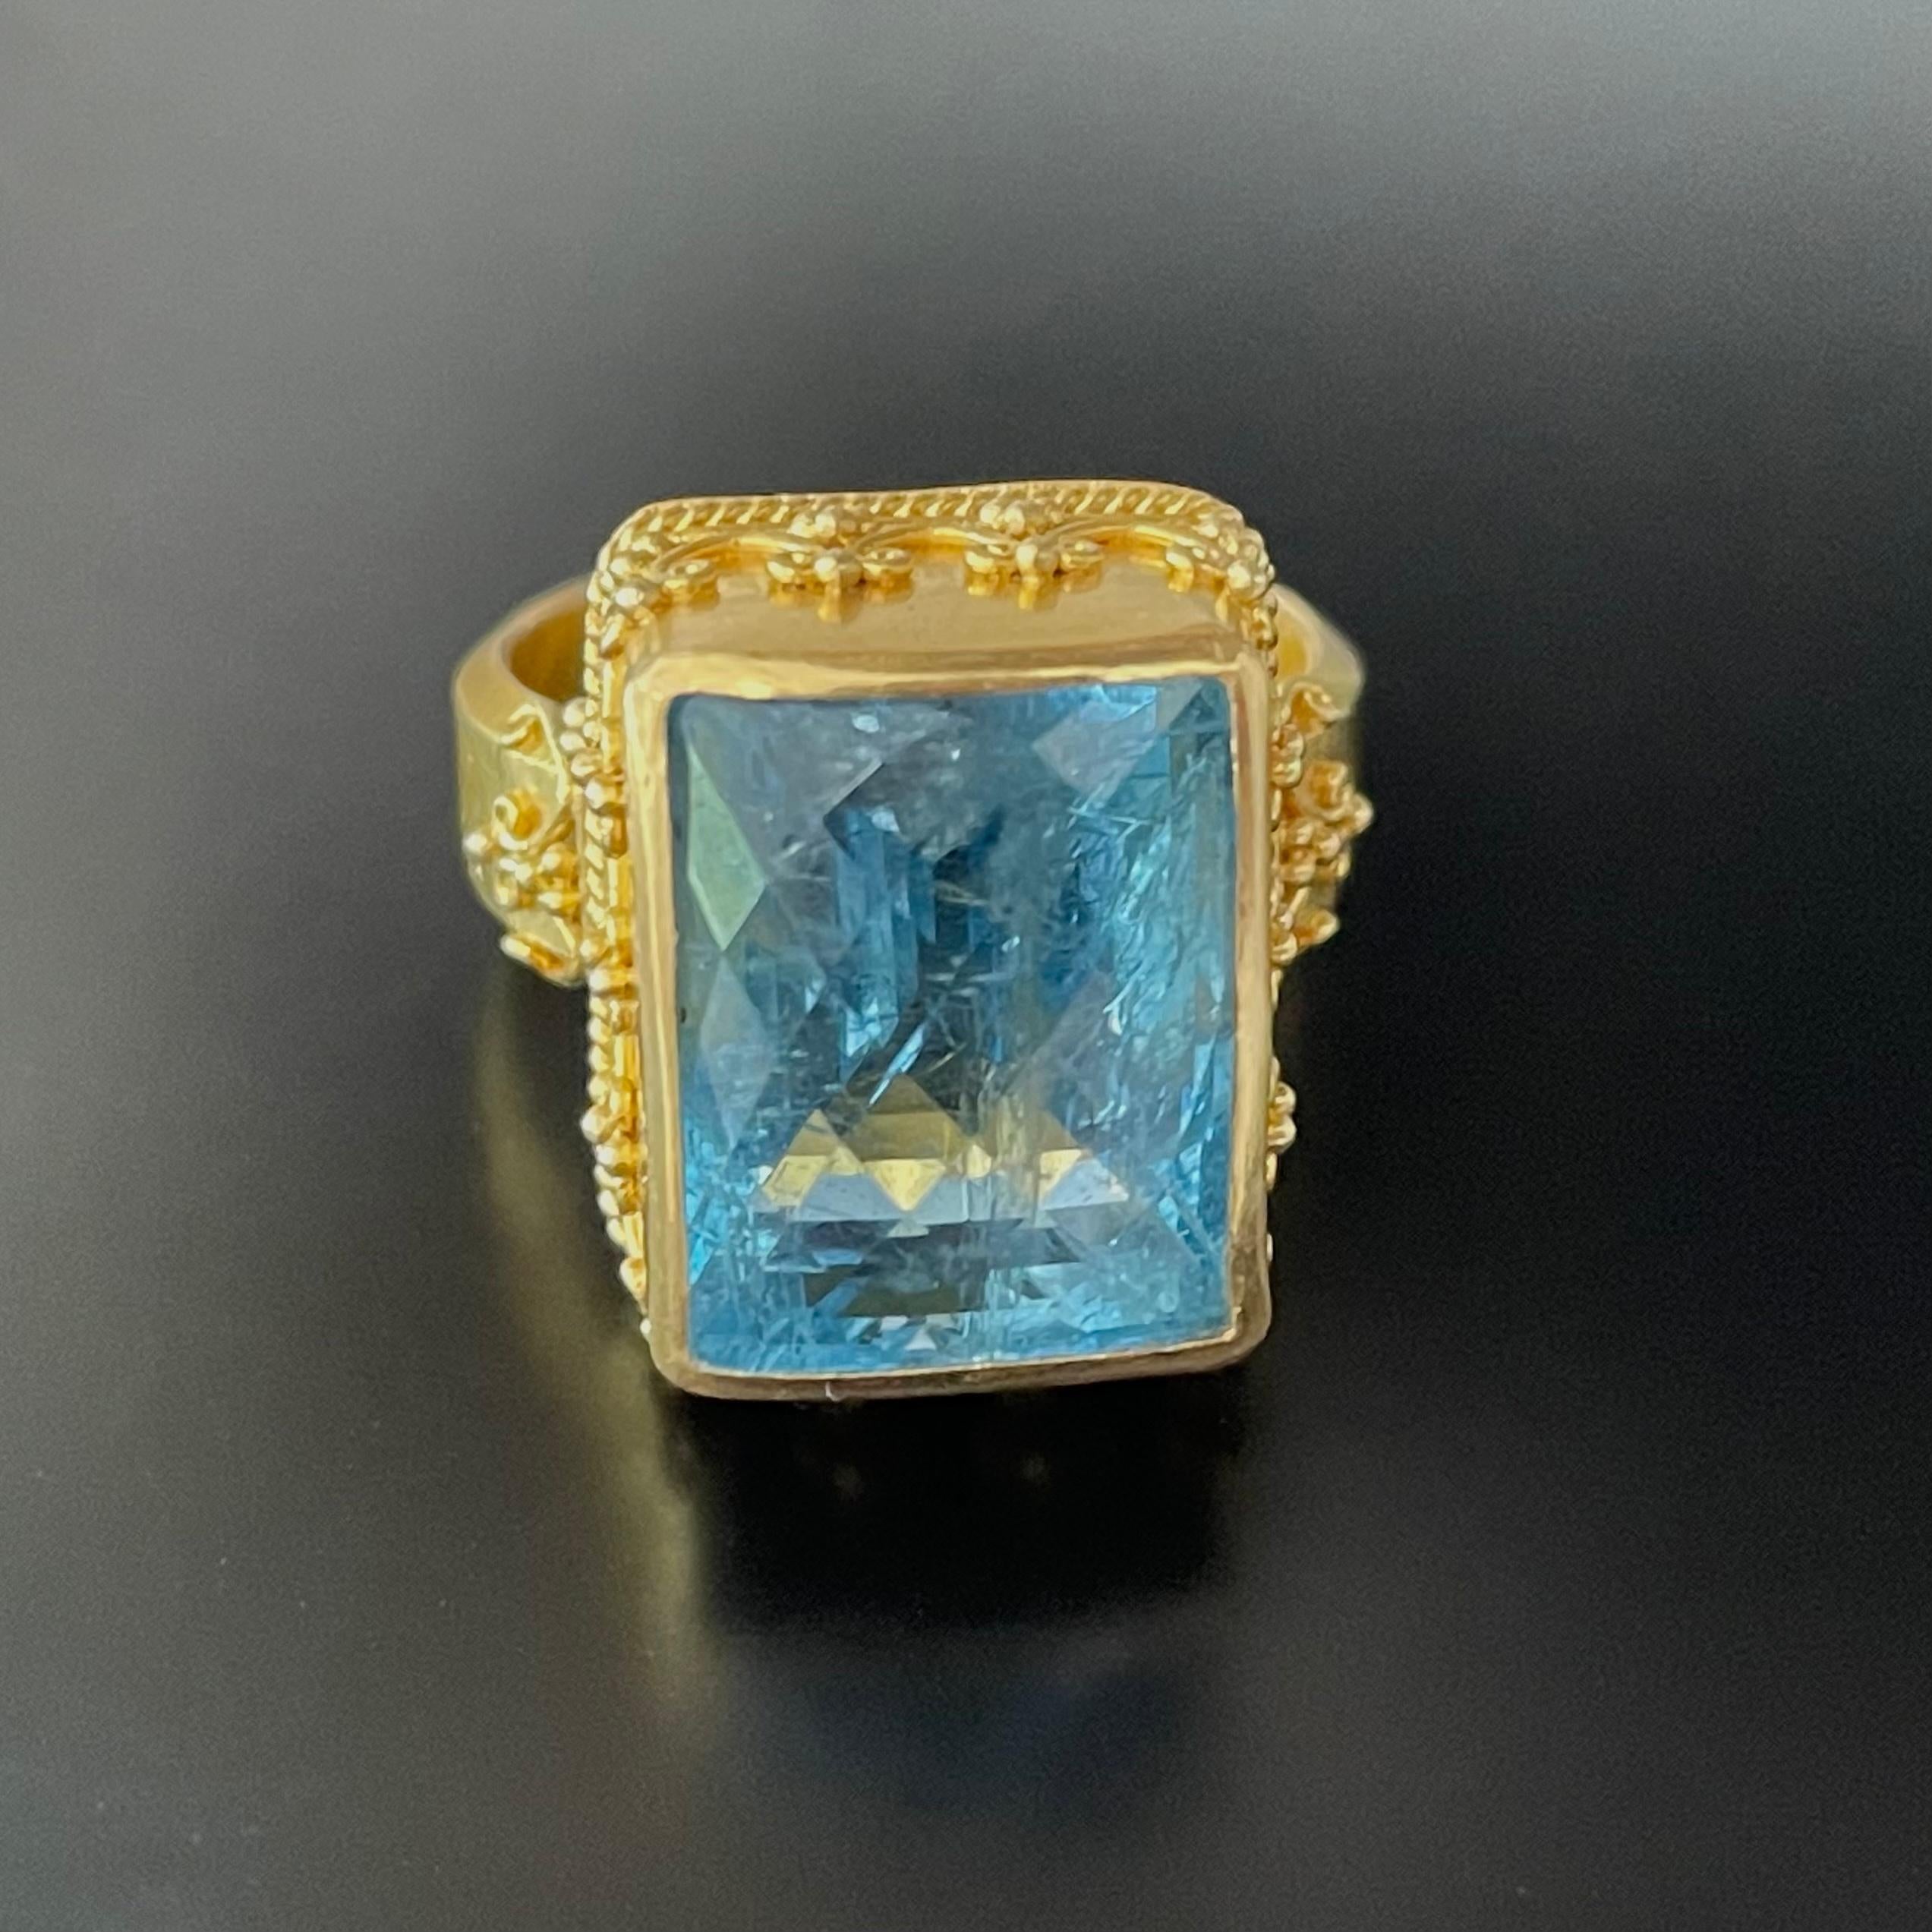 A lively deep blue diagonal checkerboard cut 10 x 13 mm Brazilian Aquamarine is set in this finely decorated handmade 22K design from Steven Battelle.  All the wire and granulation detail was carefully applied over 3 days of work by a master